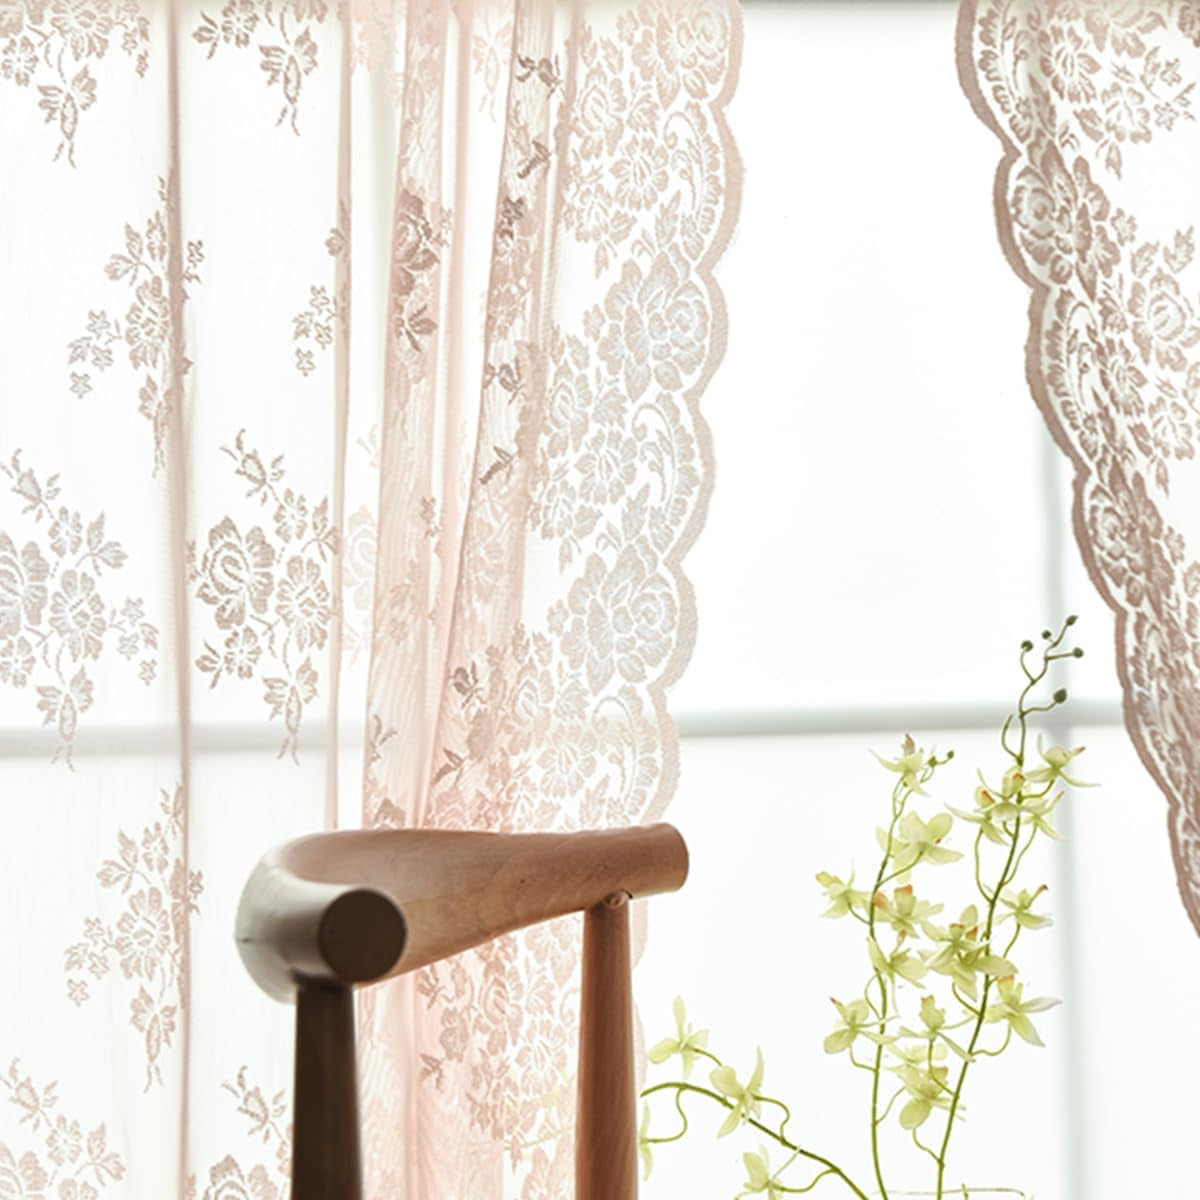 Kotile Sage Green Sheer Valance Curtain for Windows, Rustic Floral Spring Sheer Window Valance Curtain 18 Inch Length, Light Filtering Rod Pocket Lace Valance, 52 X 18 Inch, 1 Panel, Sage Green  Kotile Textile Blush Pink 52 In X 63 In Grommet 